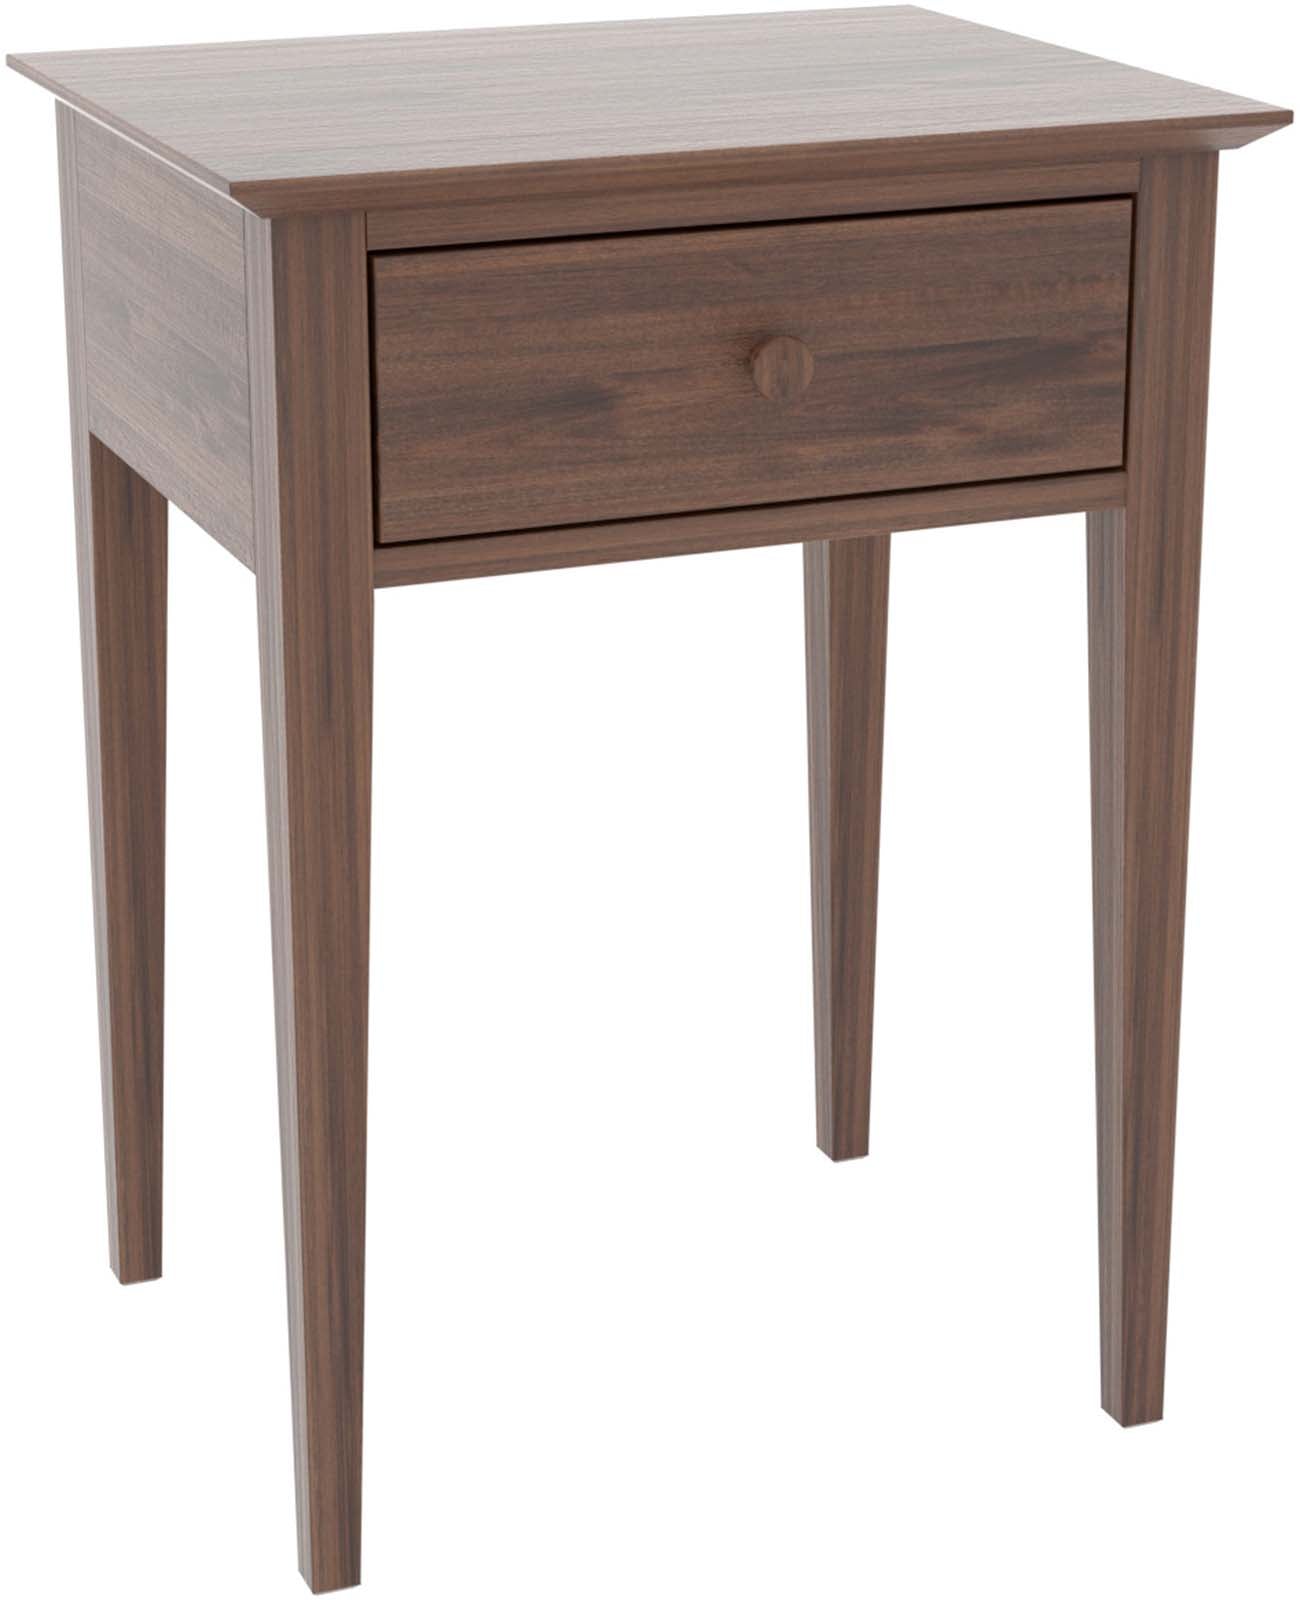 Gable Road One-Drawer Nightstand - Stickley Brand